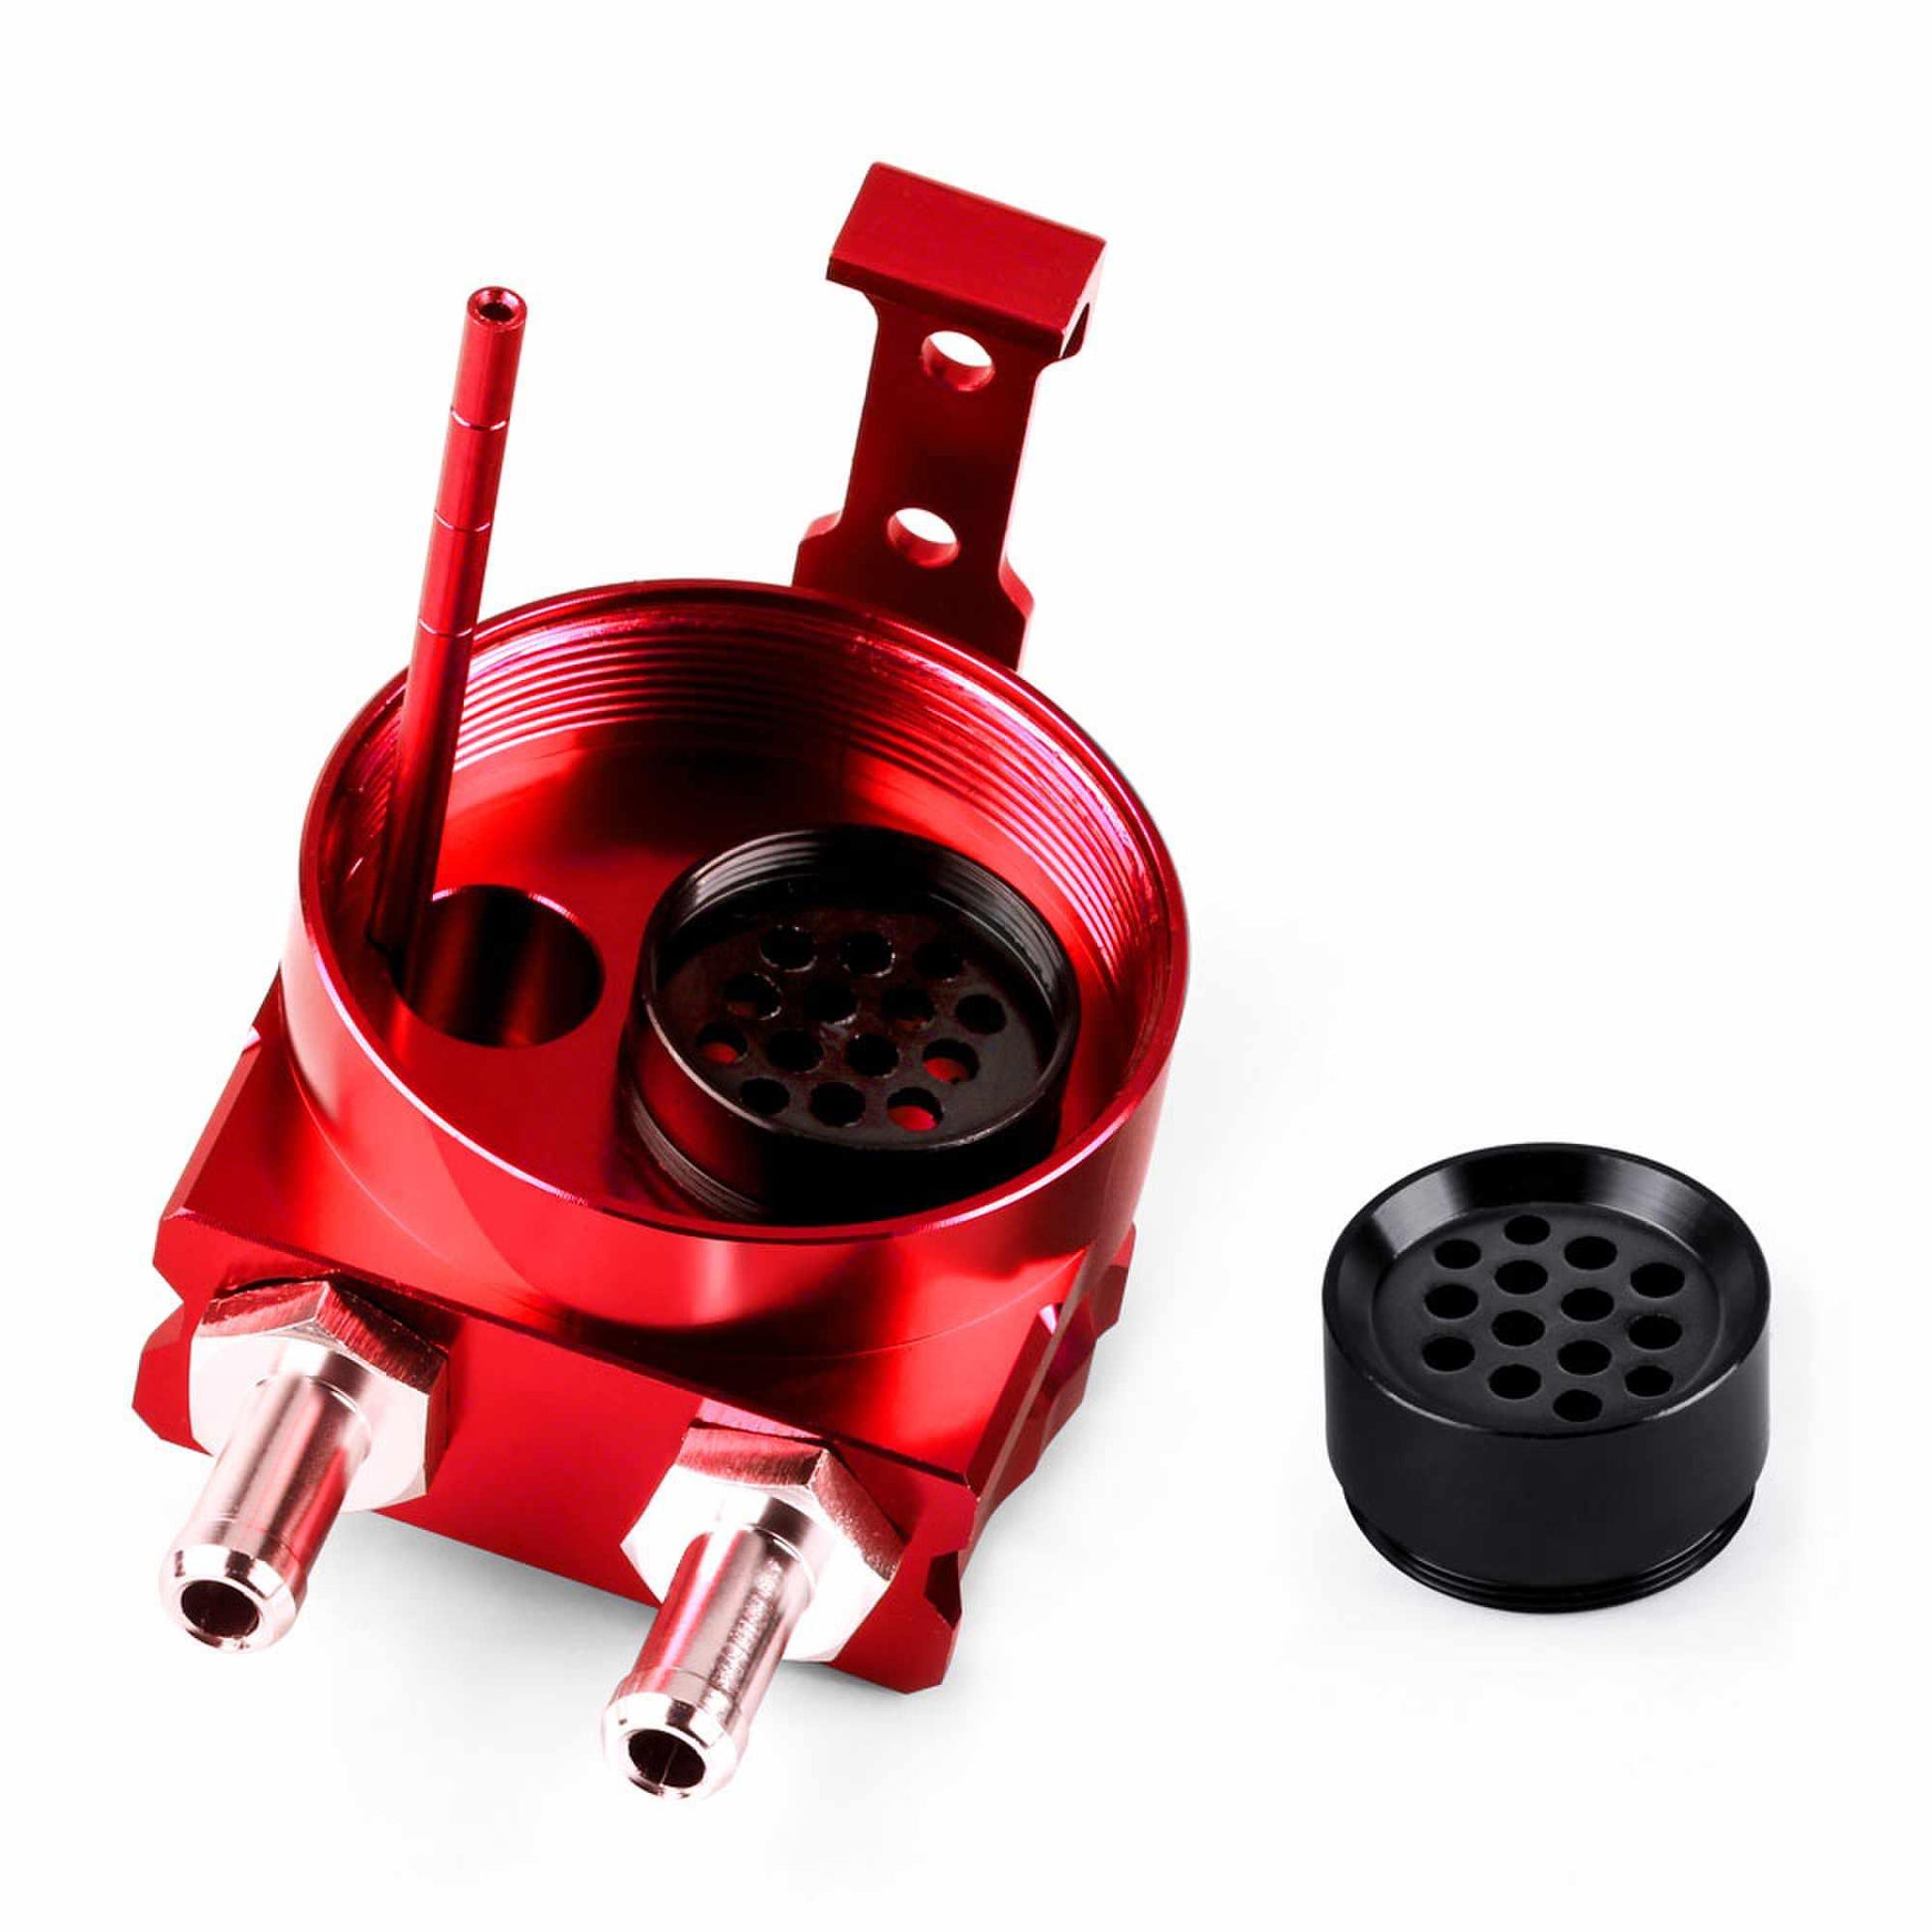 RASTP Universal 400ml Racing Oil Catch Can Tank Kit Polish Baffled Reservoir with Breather Filter with 3/8" Fuel Line - RASTP